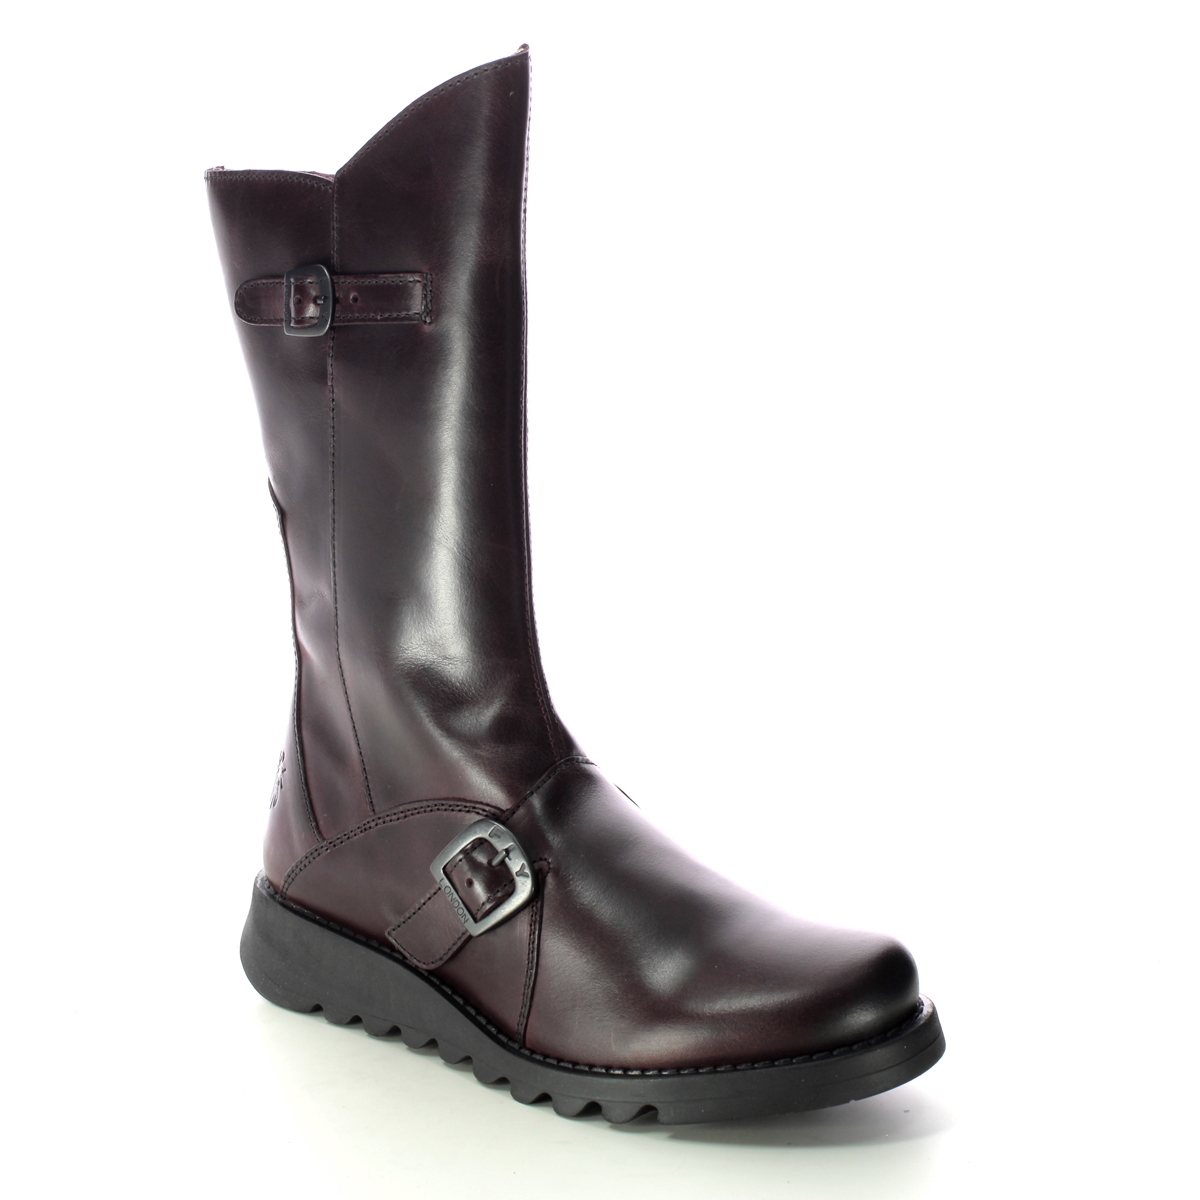 Fly London Mes 2 Wine Leather Womens Mid Calf Boots P142913 In Size 41 In Plain Wine Leather